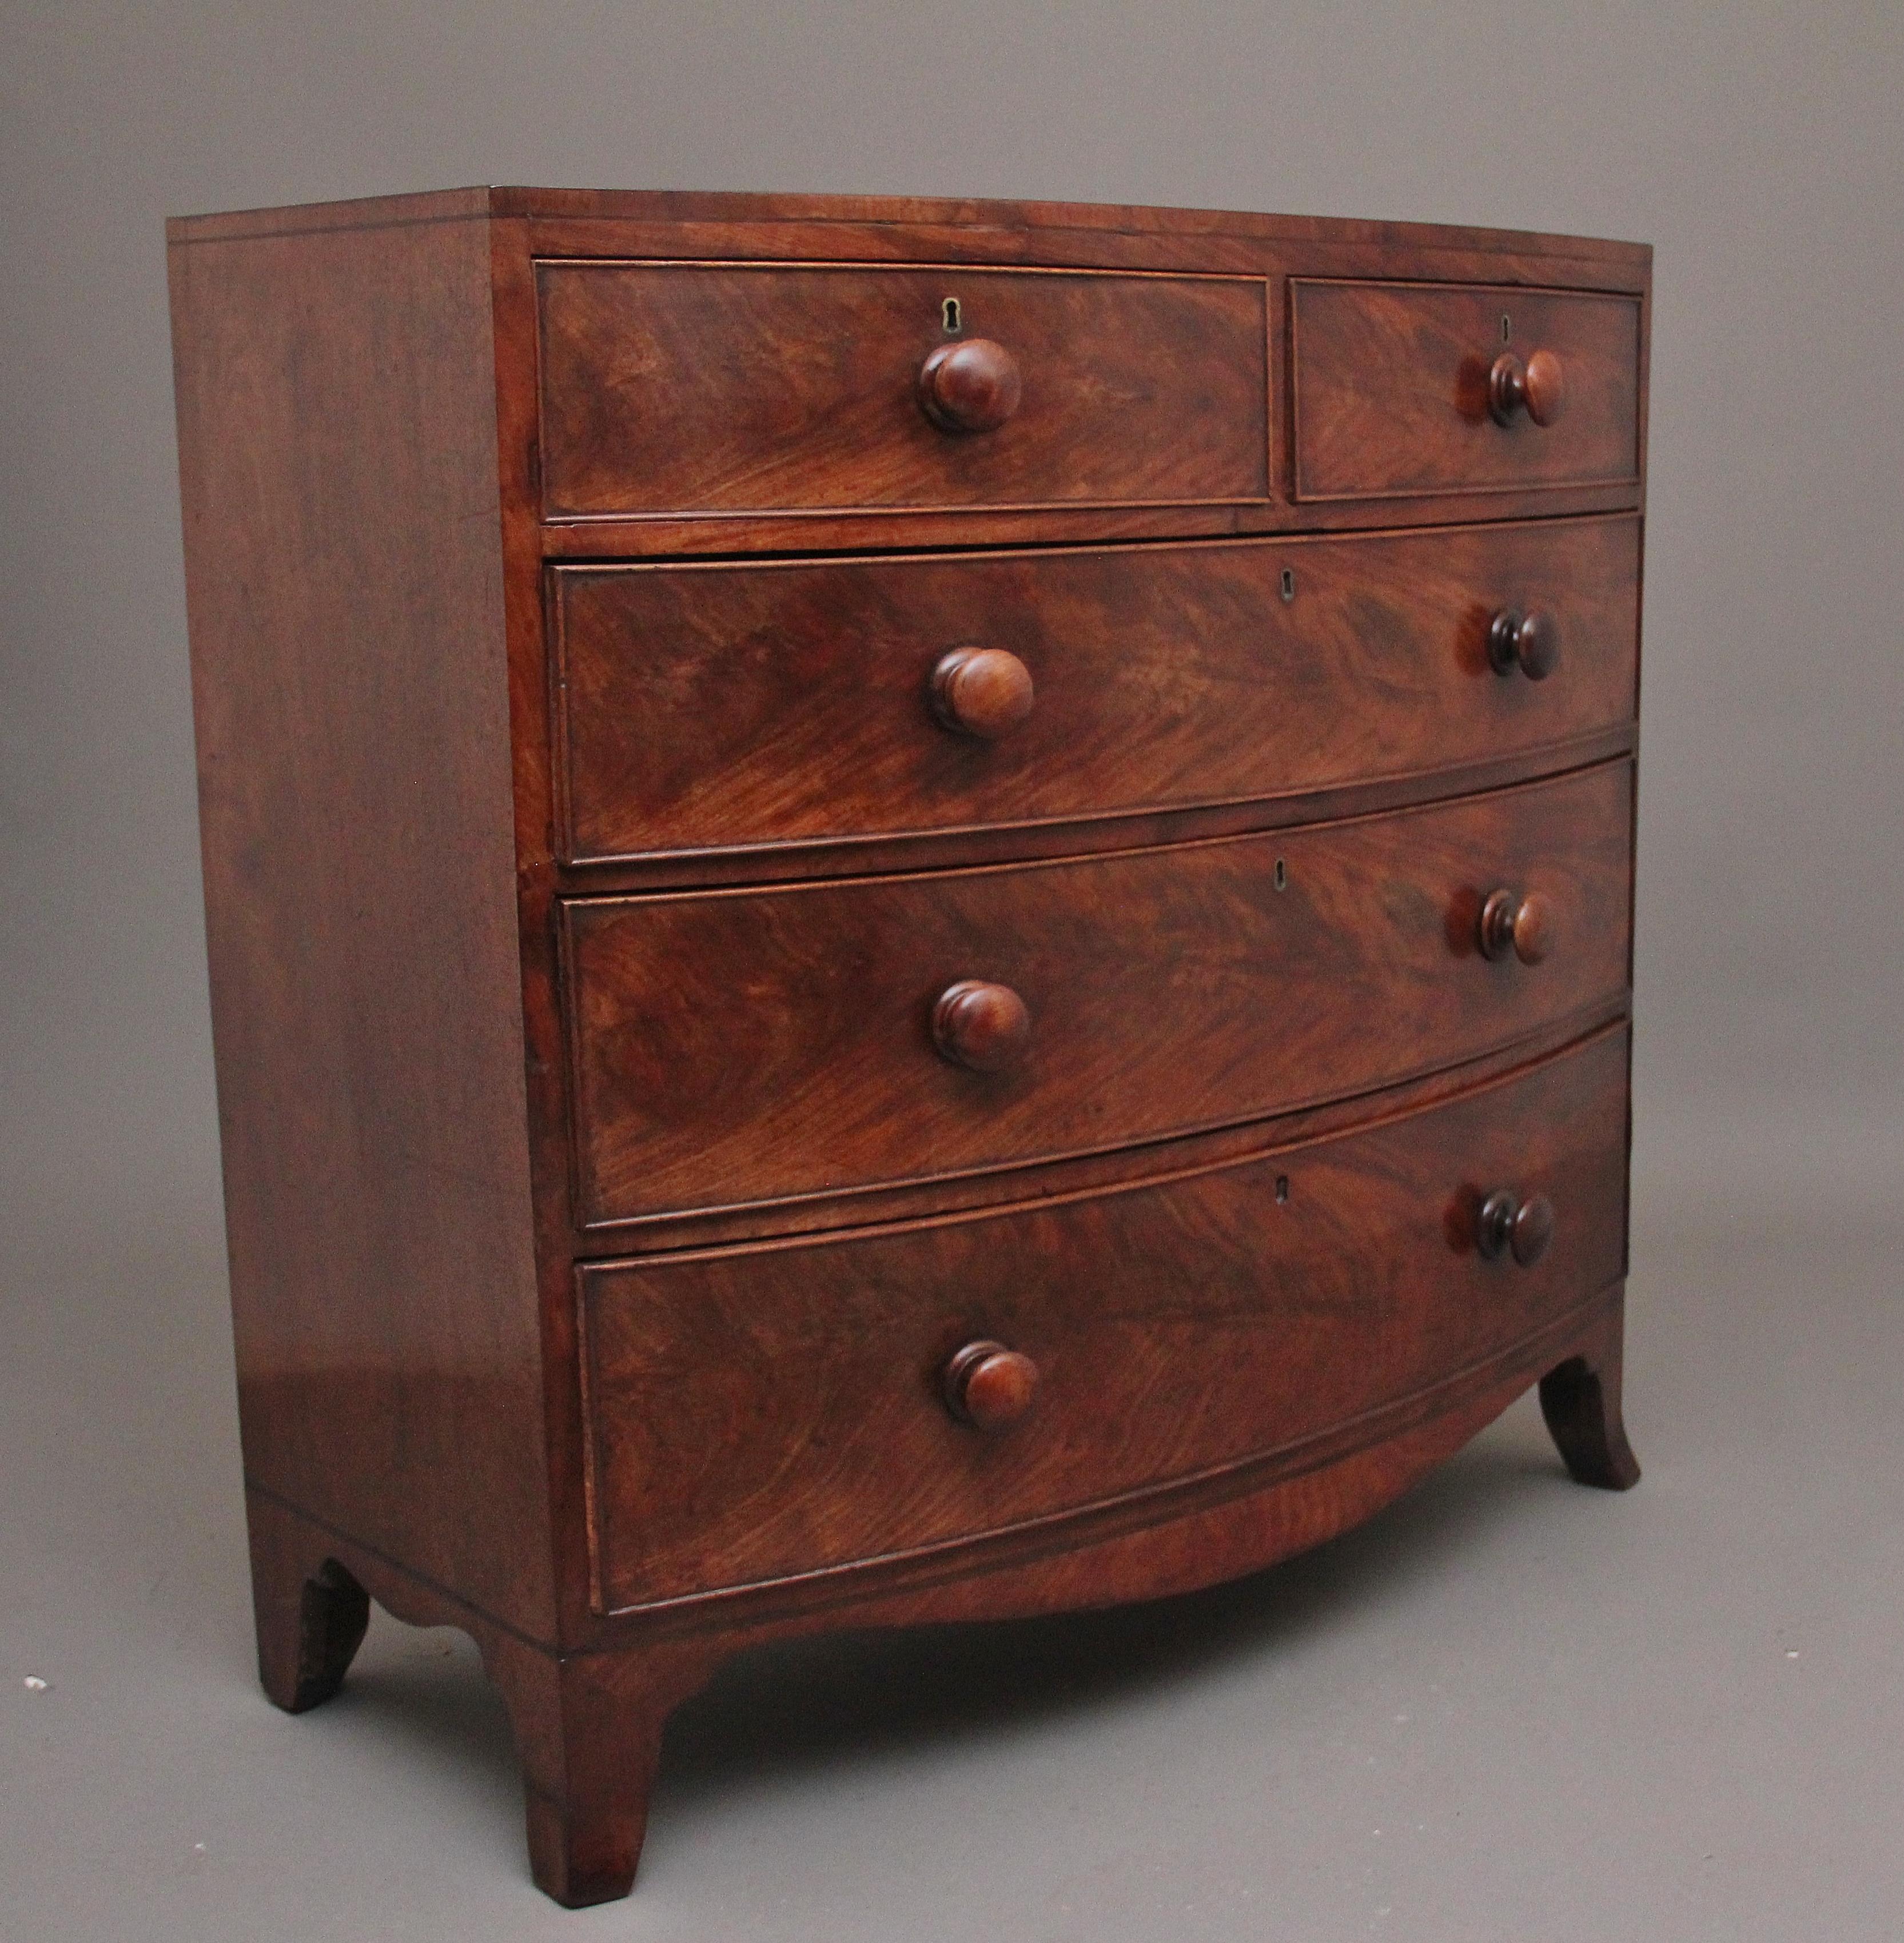 Early 19th Century mahogany bowfront chest of drawers of nice proportions, having a nice figured top above a selection of two short over three long oak lined drawers with the original turned wooden knob handles, shaped apron and supported on splay